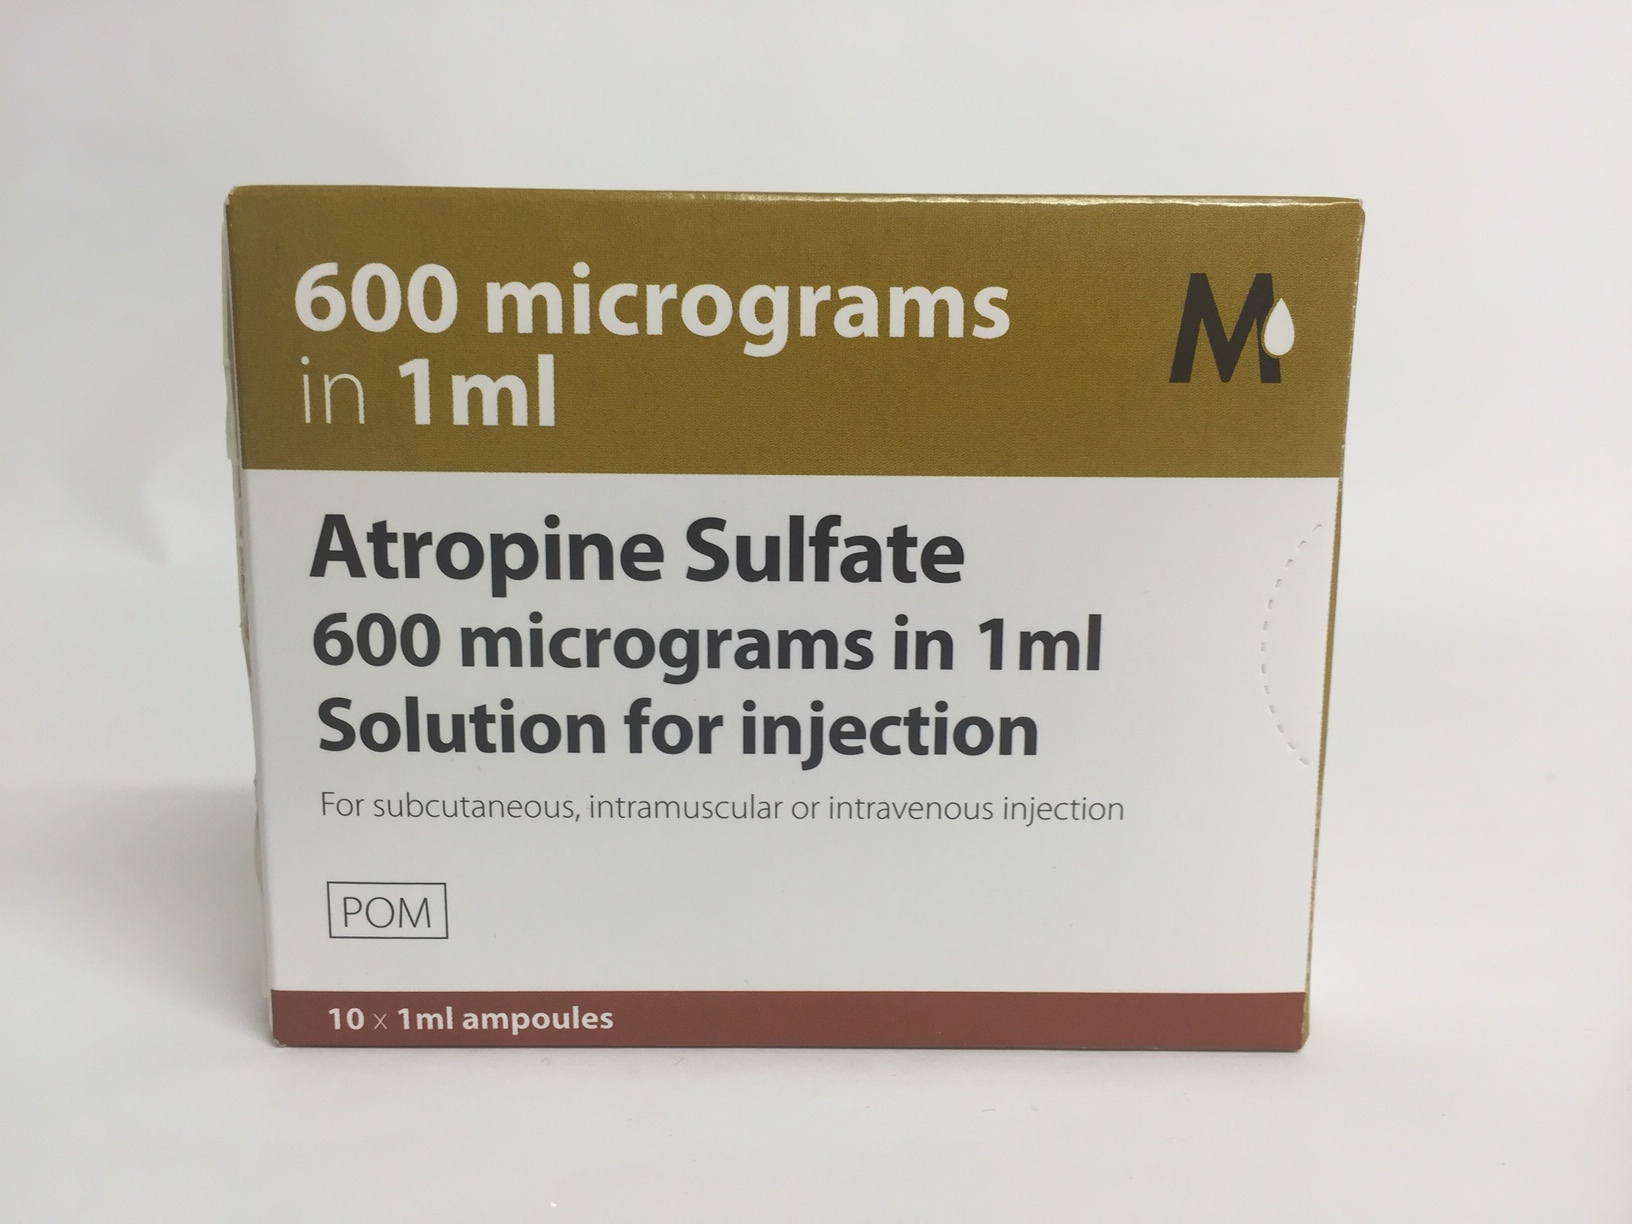 [AMB] (POM) Atropine Sulphate Injection - 600mcg/1ml - 1ml Ampoules - (Pack 10) | Medical Supermarket